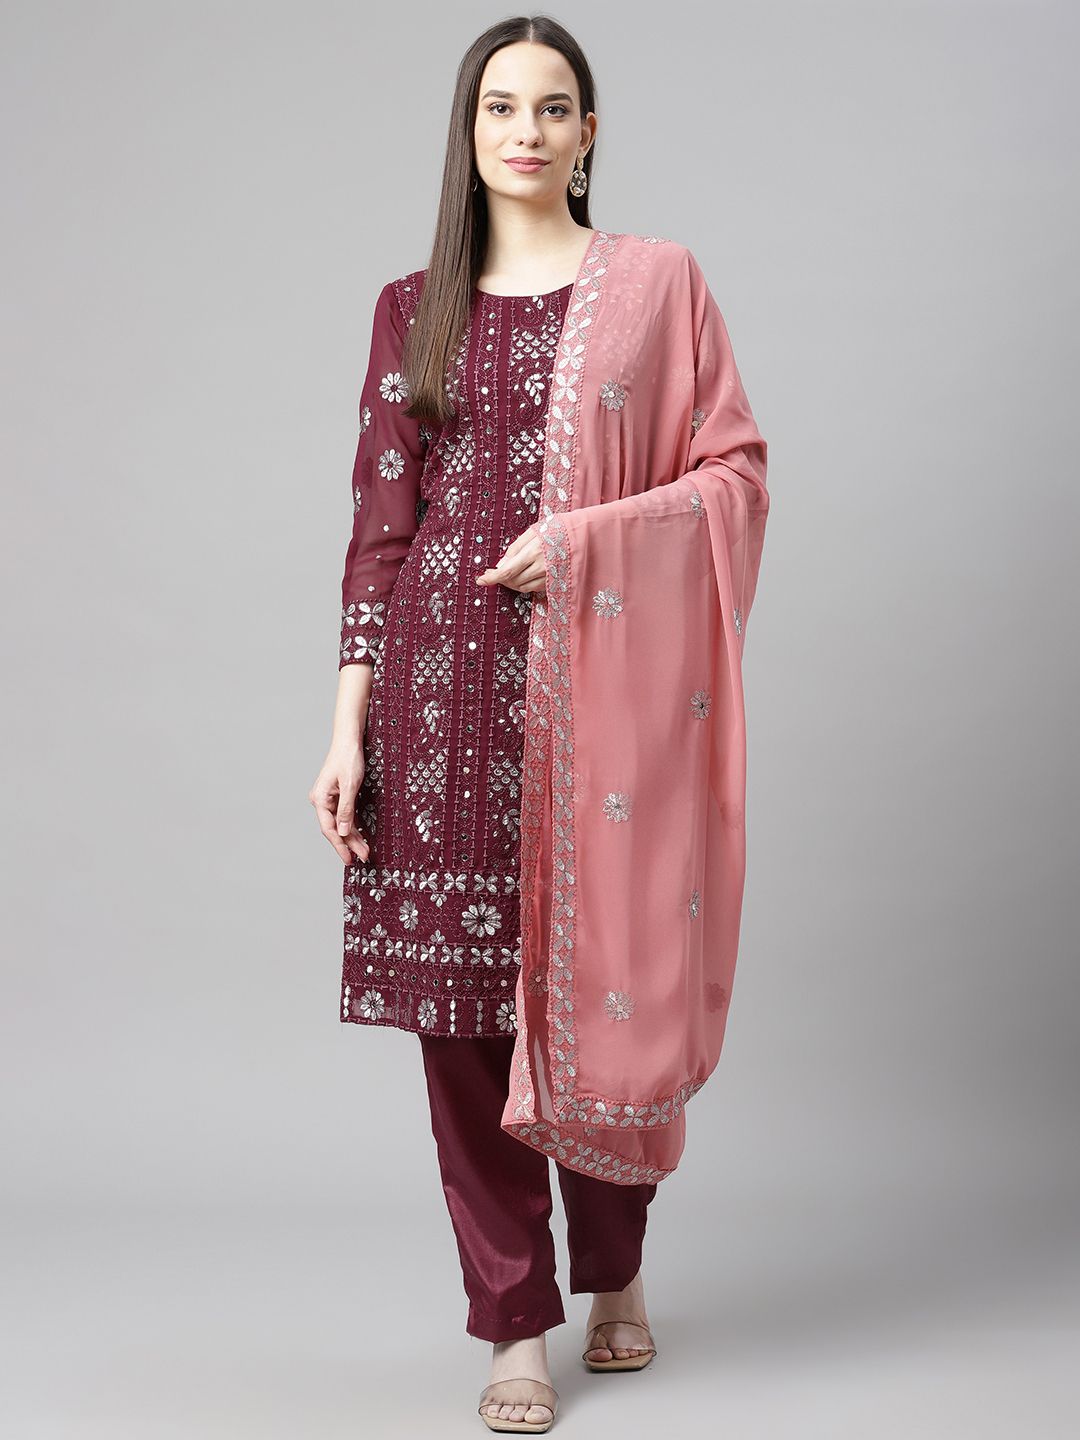 Readiprint Fashions Purple & Peach-Coloured Embroidered Unstitched Dress Material Price in India